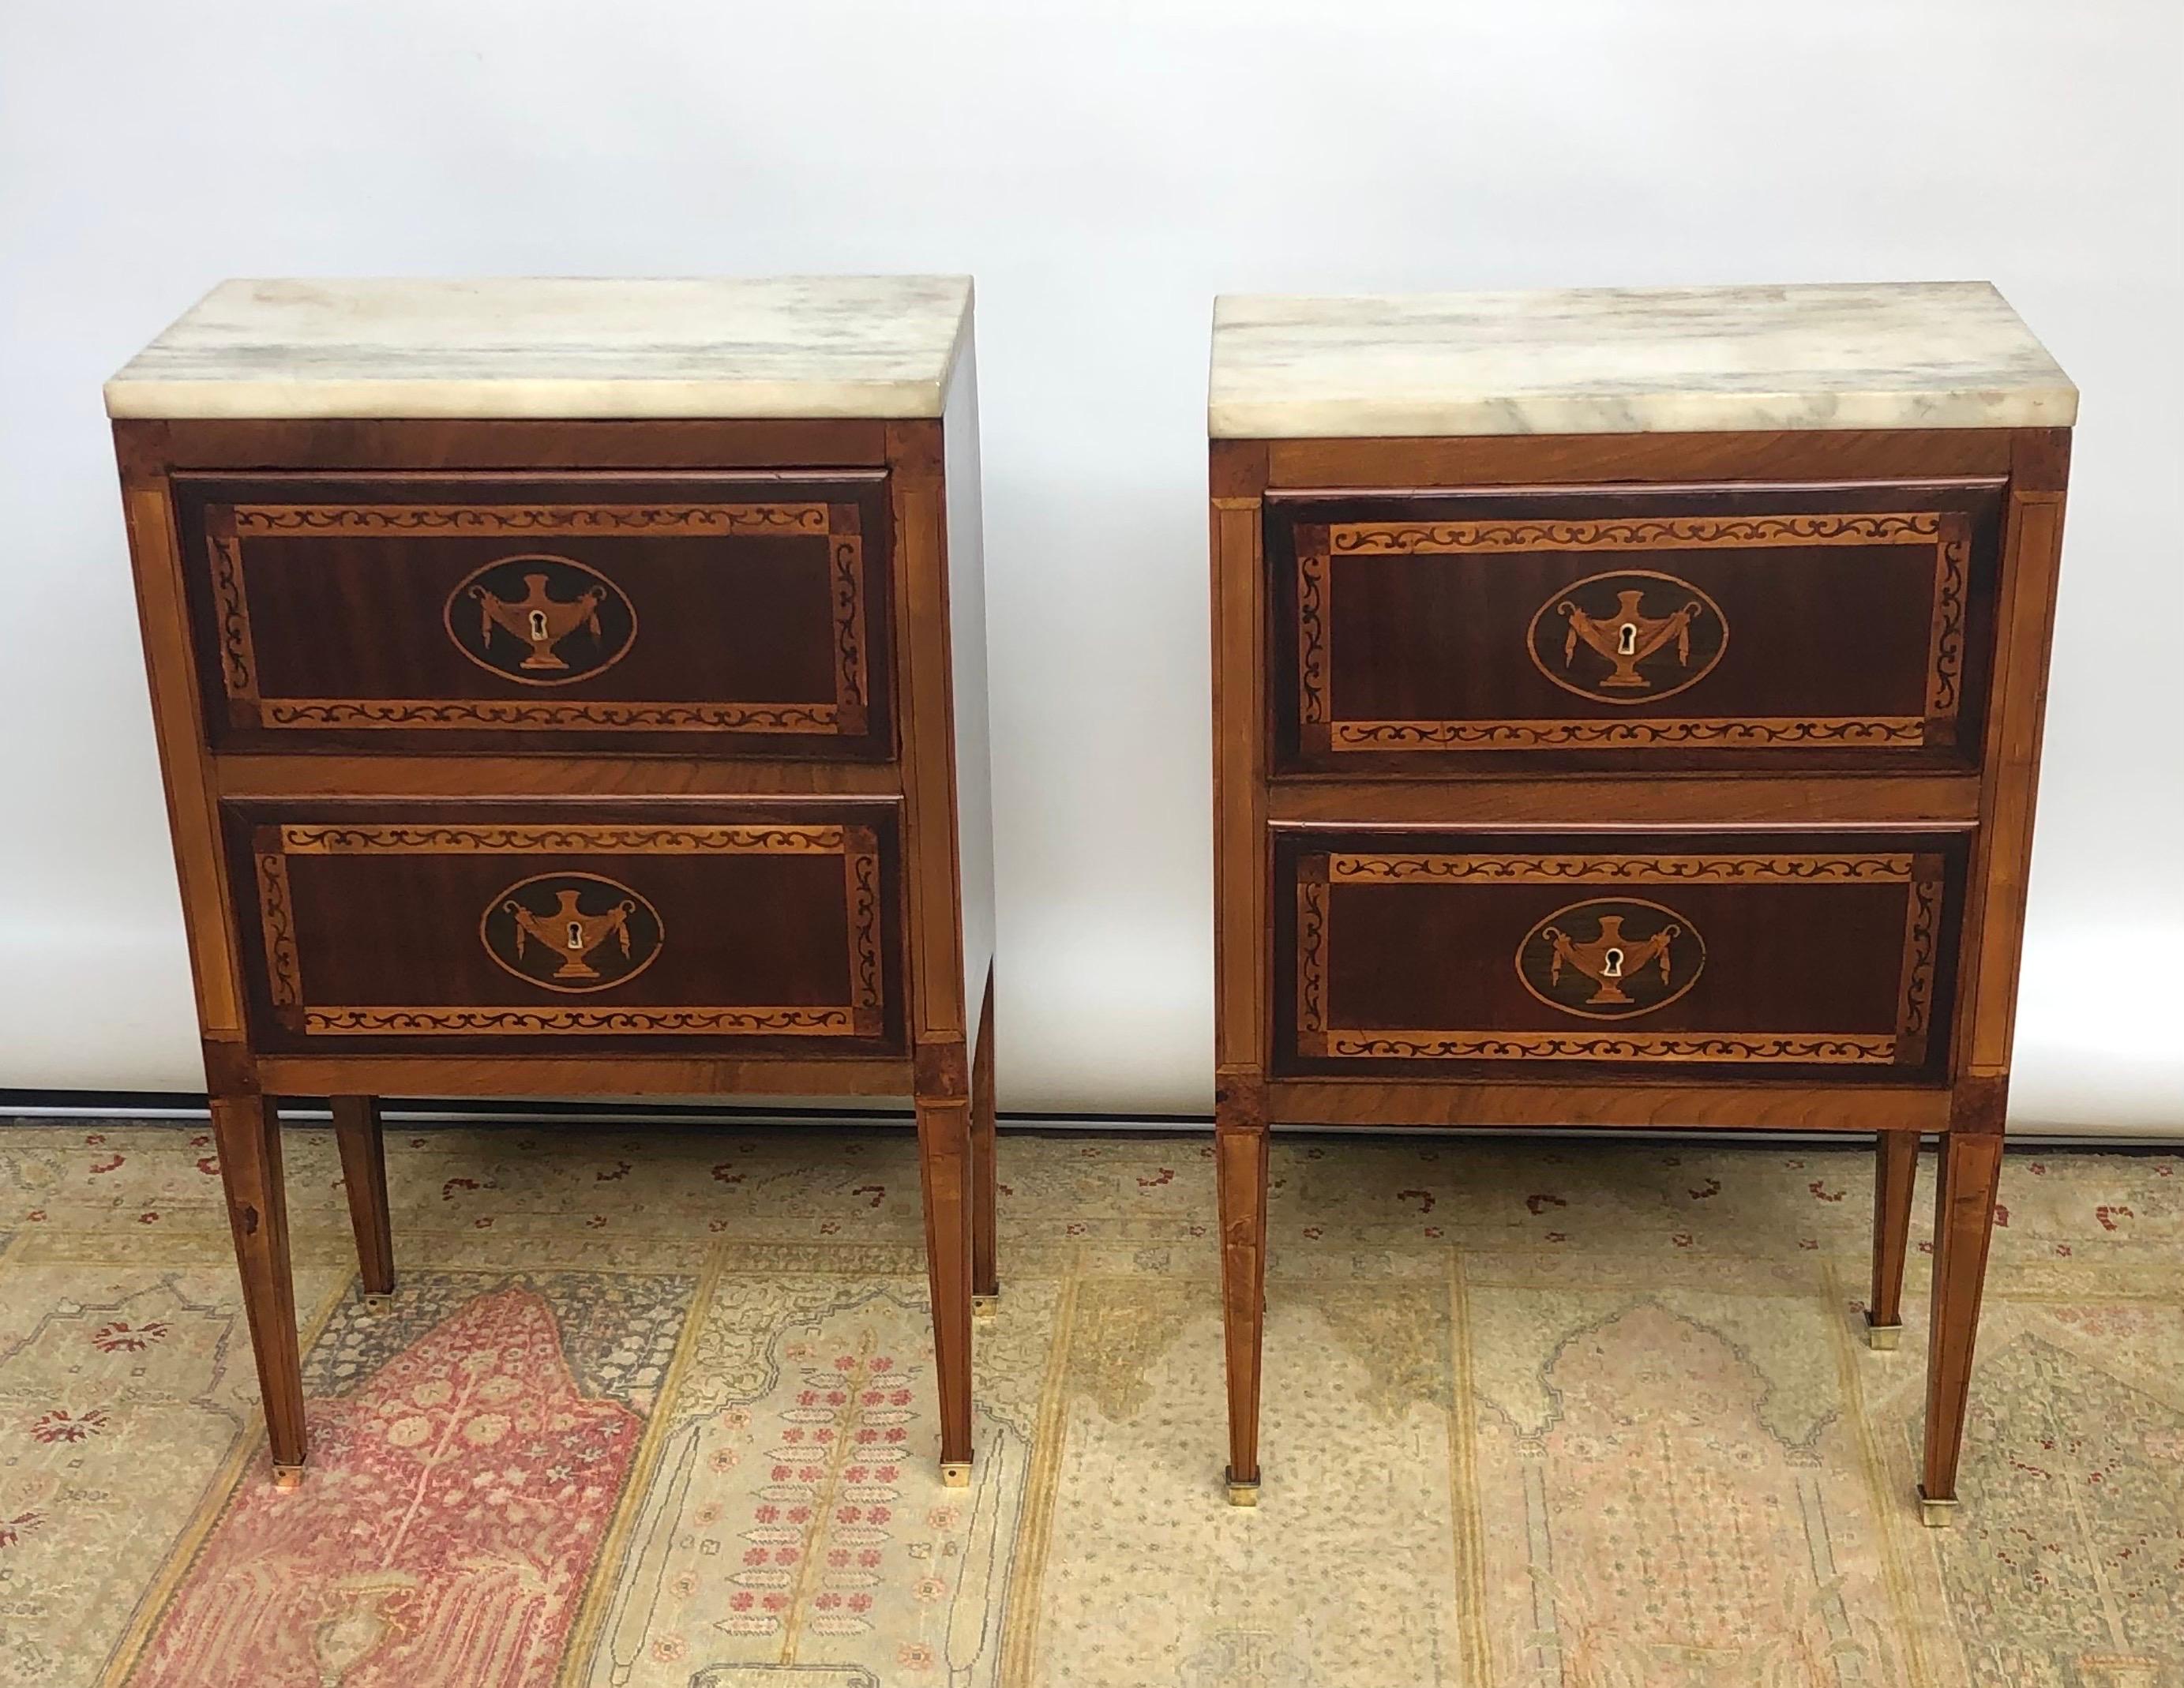 This Elegant Pair of Neoclassical Marquetry Commodes with Marble Tops where made in Italy in the late Eighteenth Century.  The Italian Commodes have walnut, mahogany and marquetry inlayed drawers above square tapered legs with brass cups on the